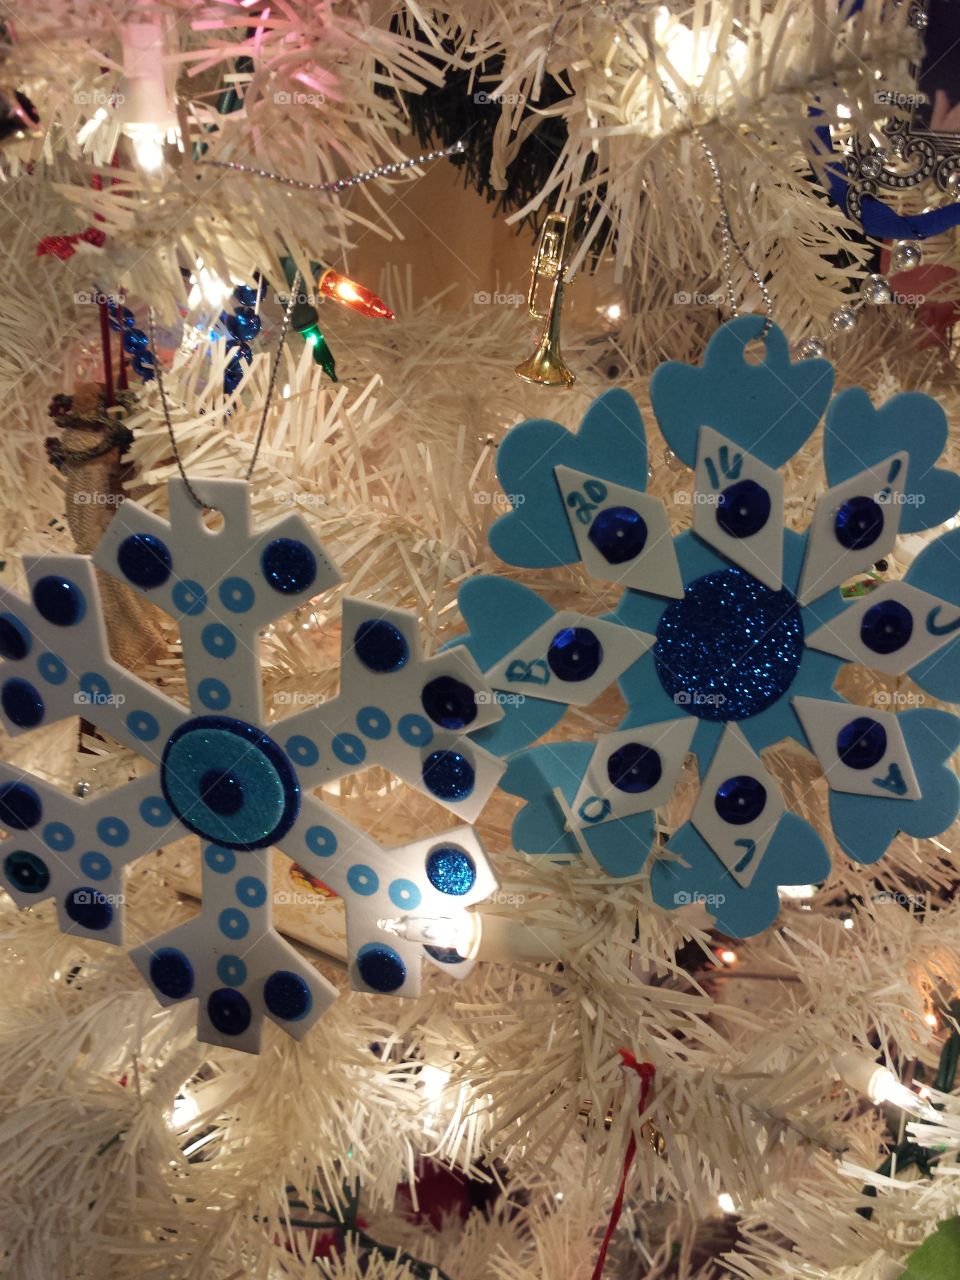 Kid Crafted Snowflake Ornaments